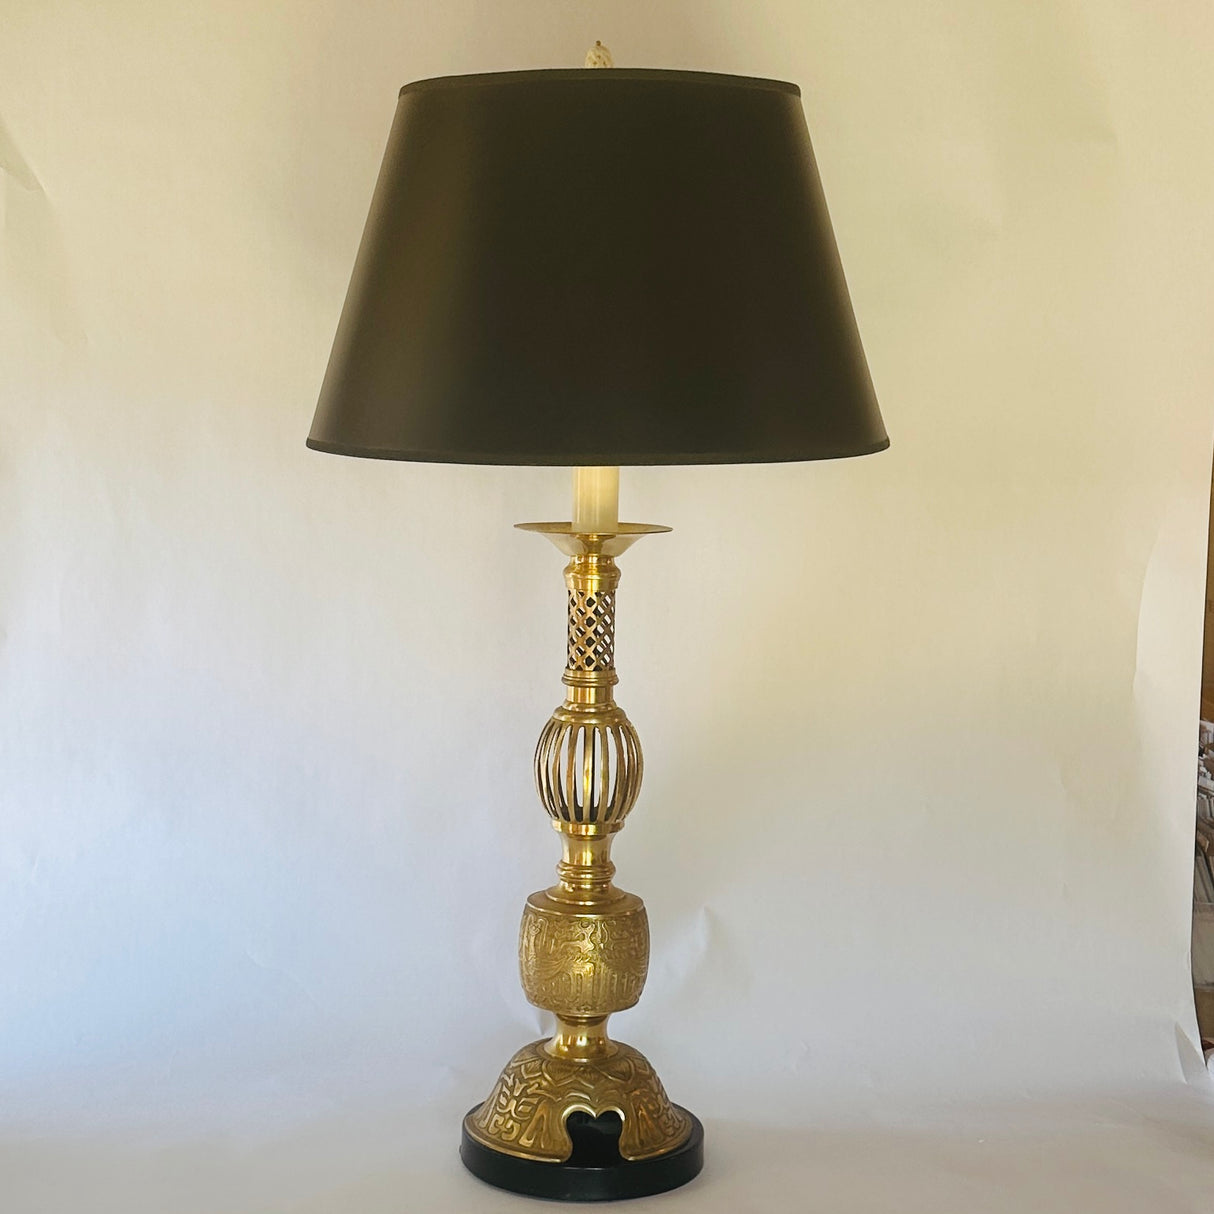 Tall Brass Asian Table Lamp with Lattice and Cut-Out Detailing